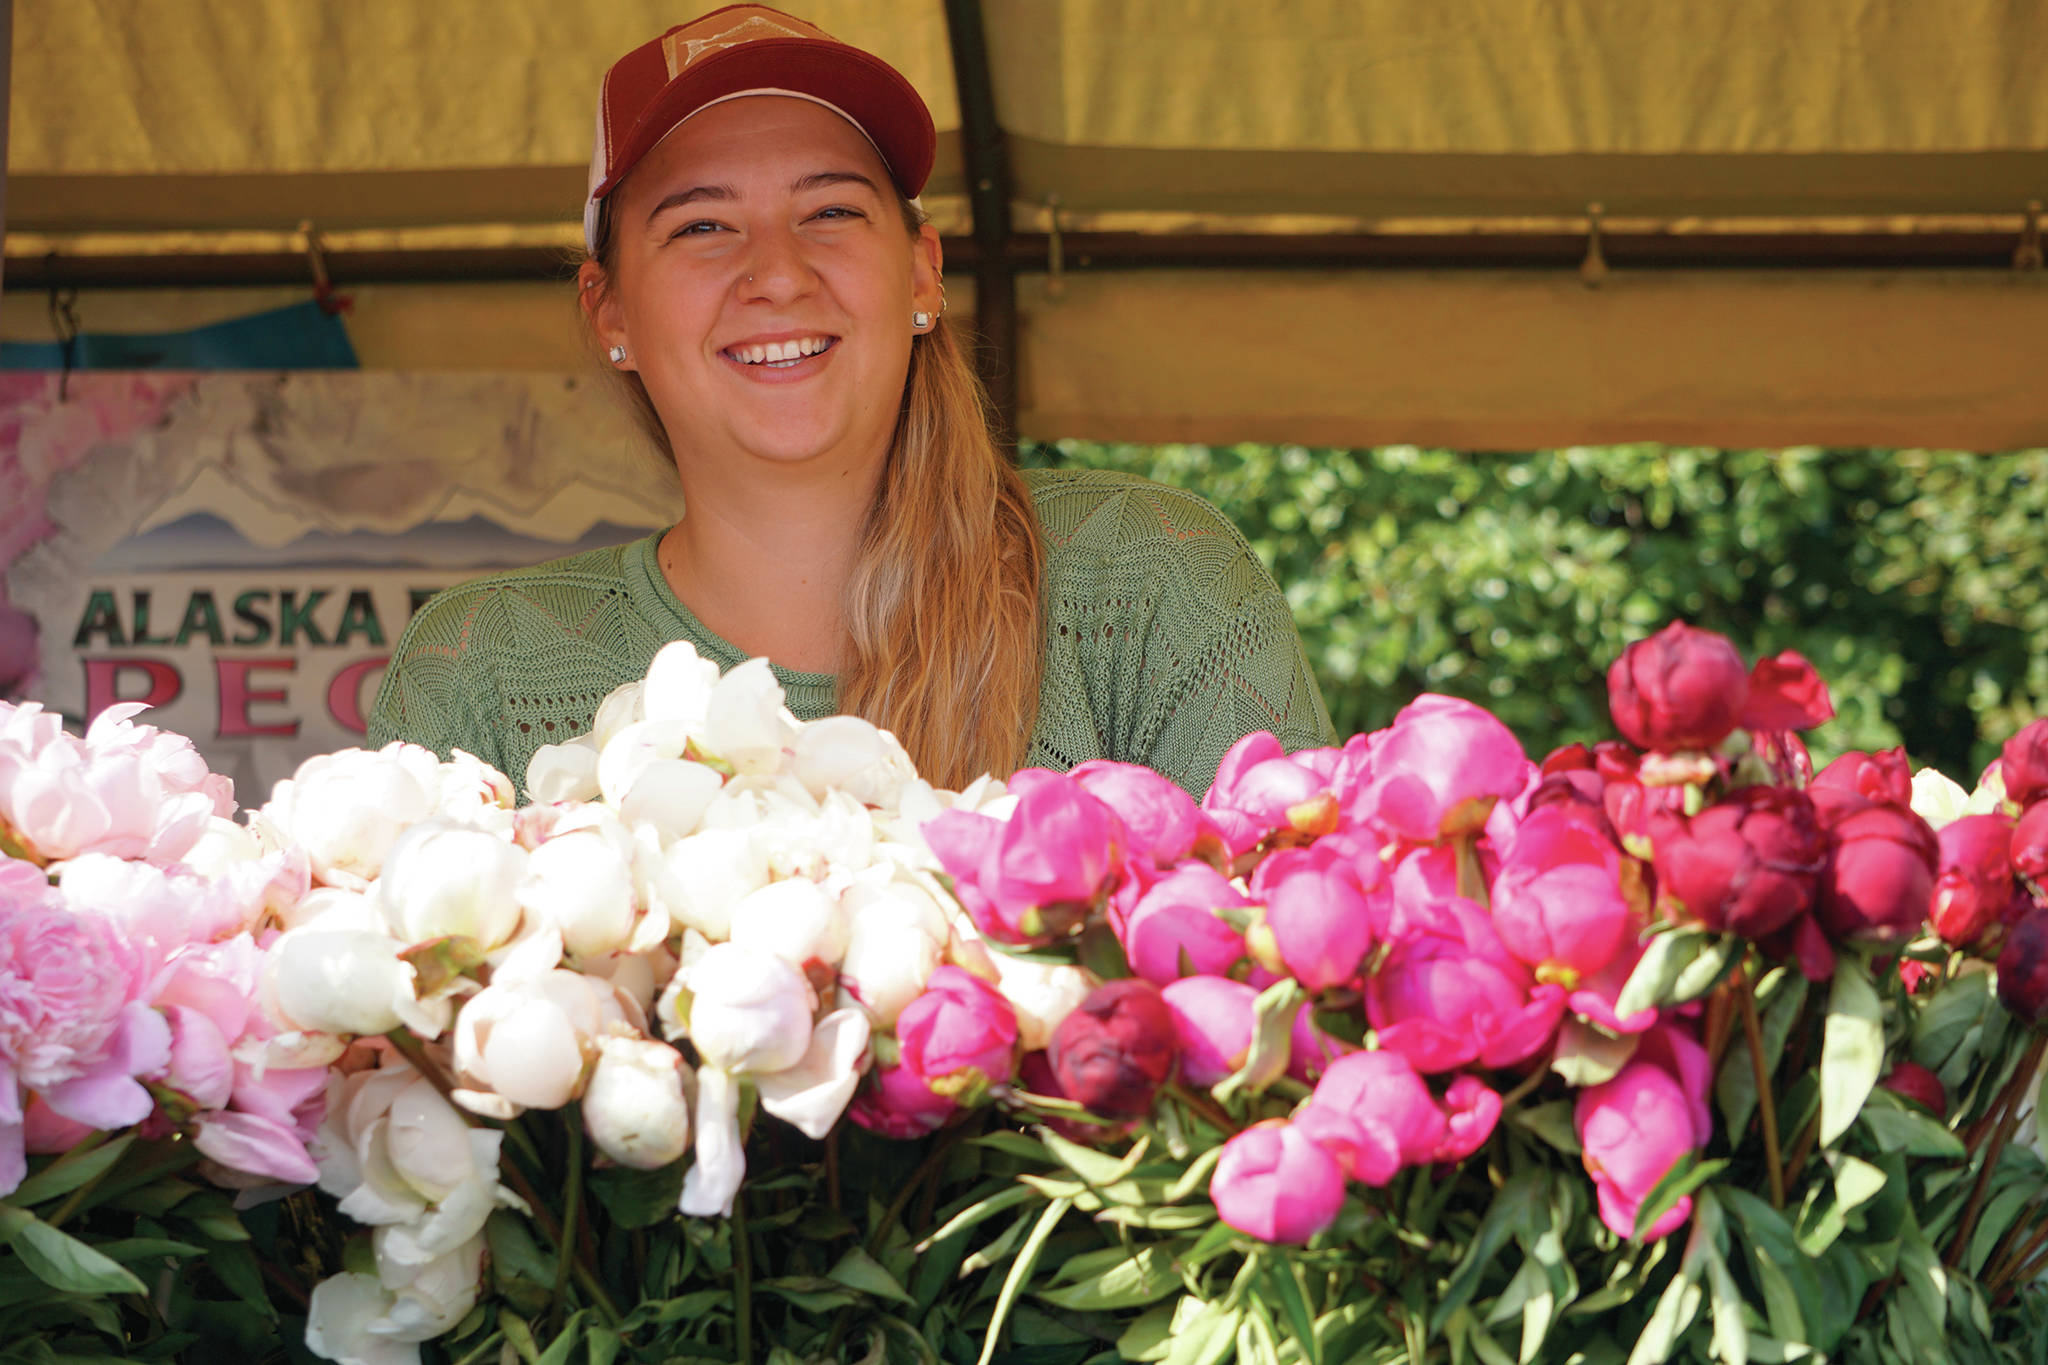 Genevieve Tymrak poses for a photo behind fresh-cut peonies on Saturday, Aug. 10, 2019, at the Alaska Perfect Peonies booth at the Homer Farmers Market in Homer, Alaska. (Photo by Michael Armstrong/Homer News)